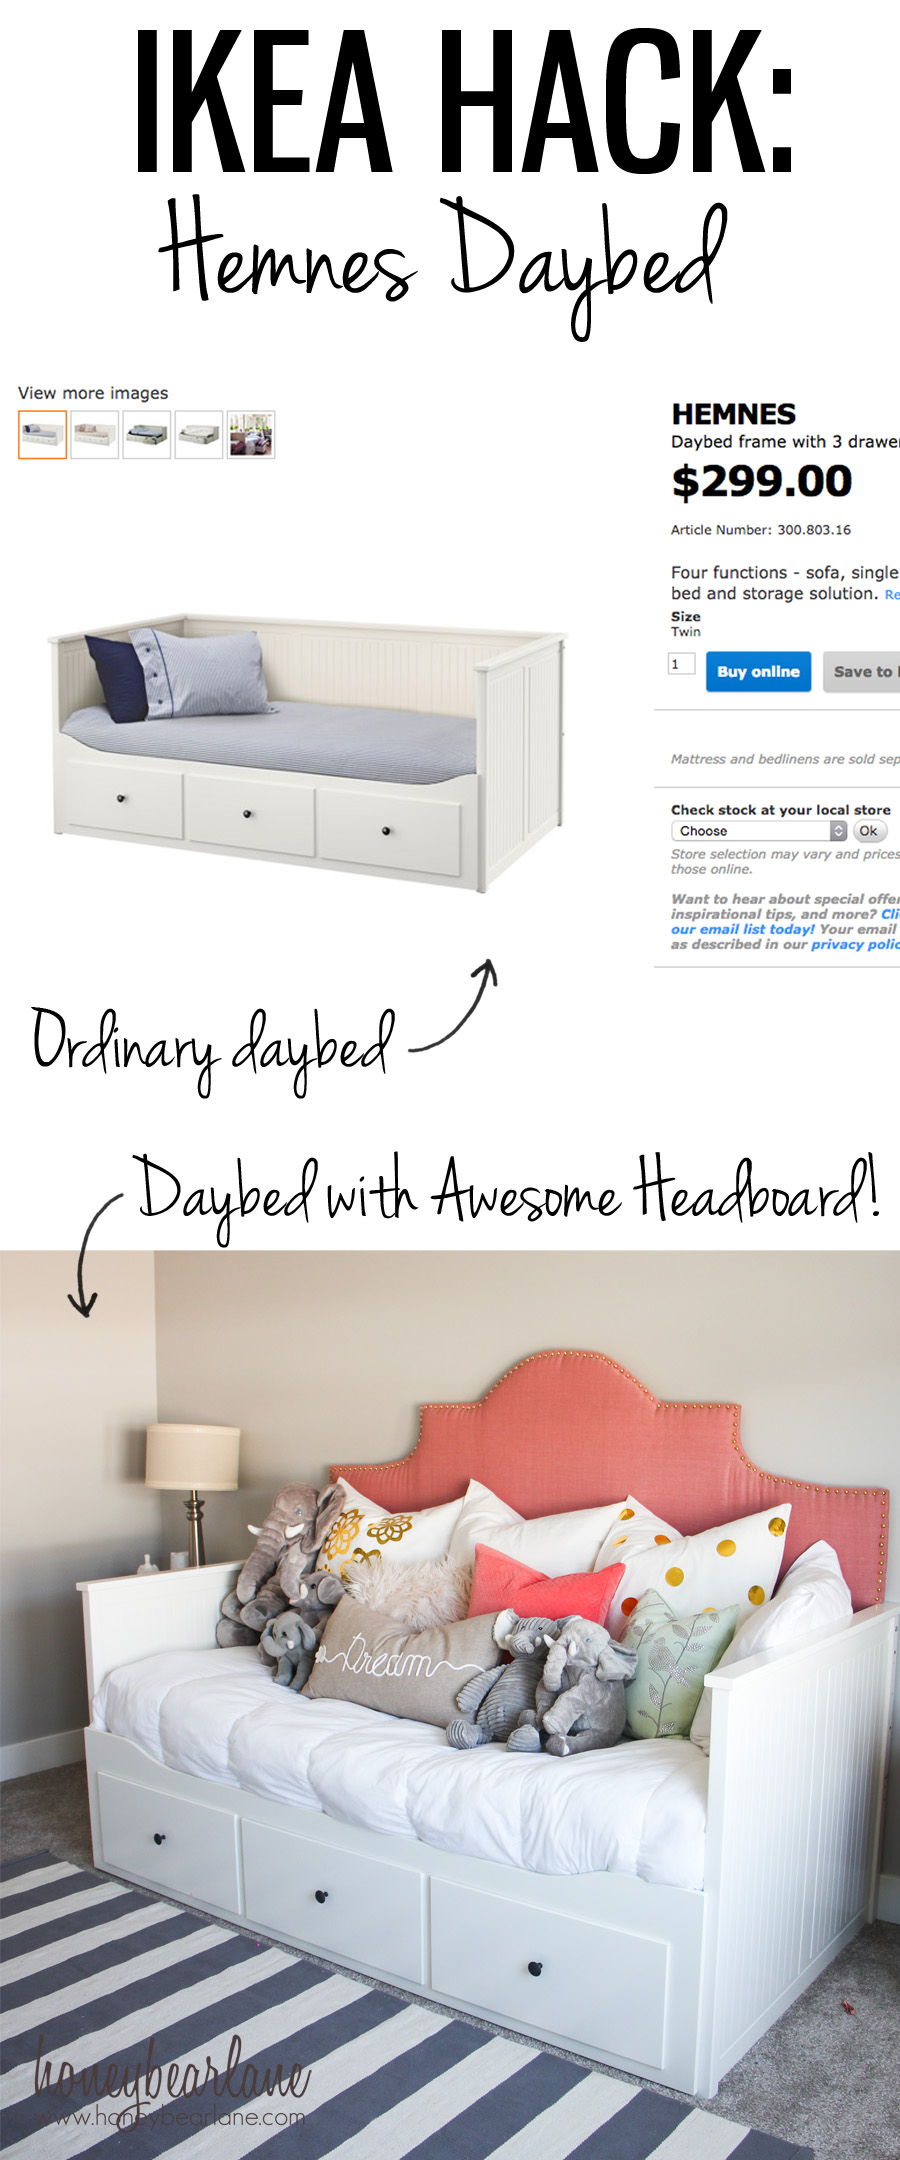 ikea hemnes day bed review